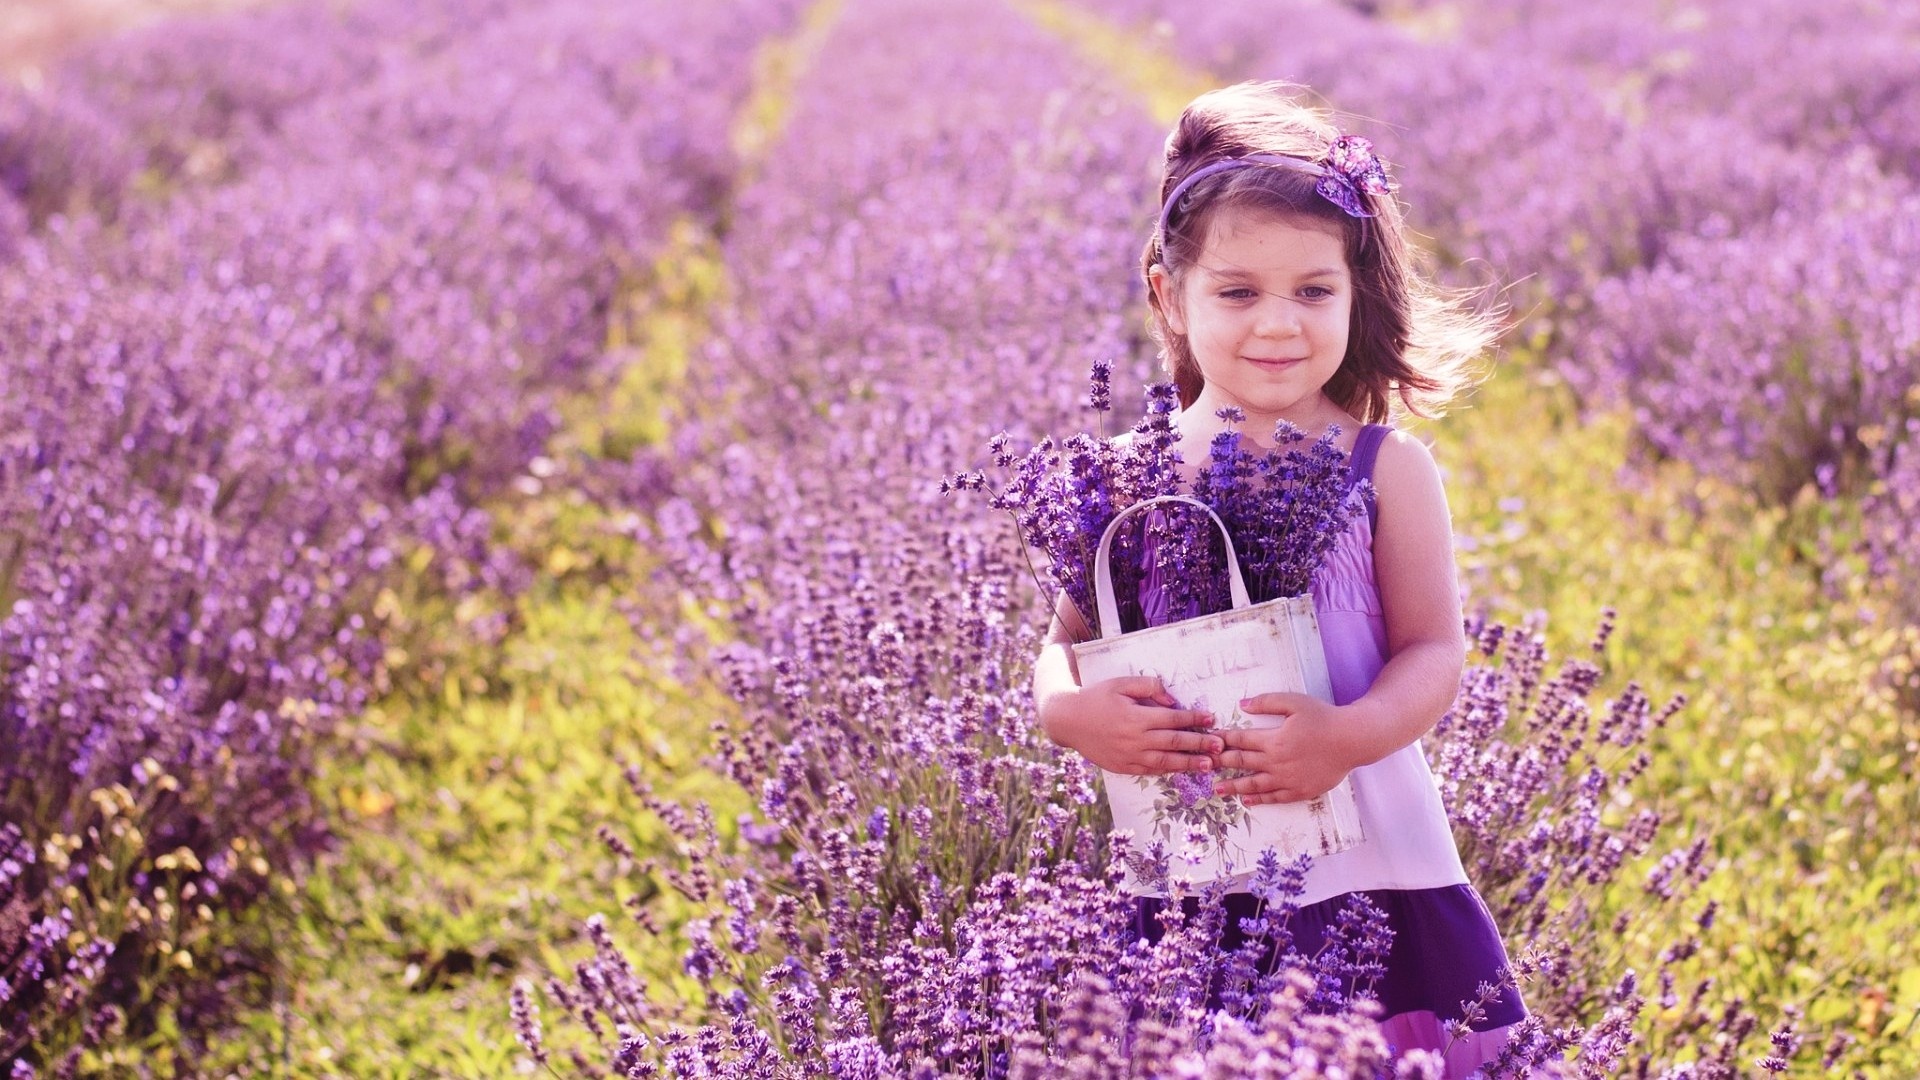 Lavender Flowers Background - Wallpaper, High Definition, High Quality,  Widescreen